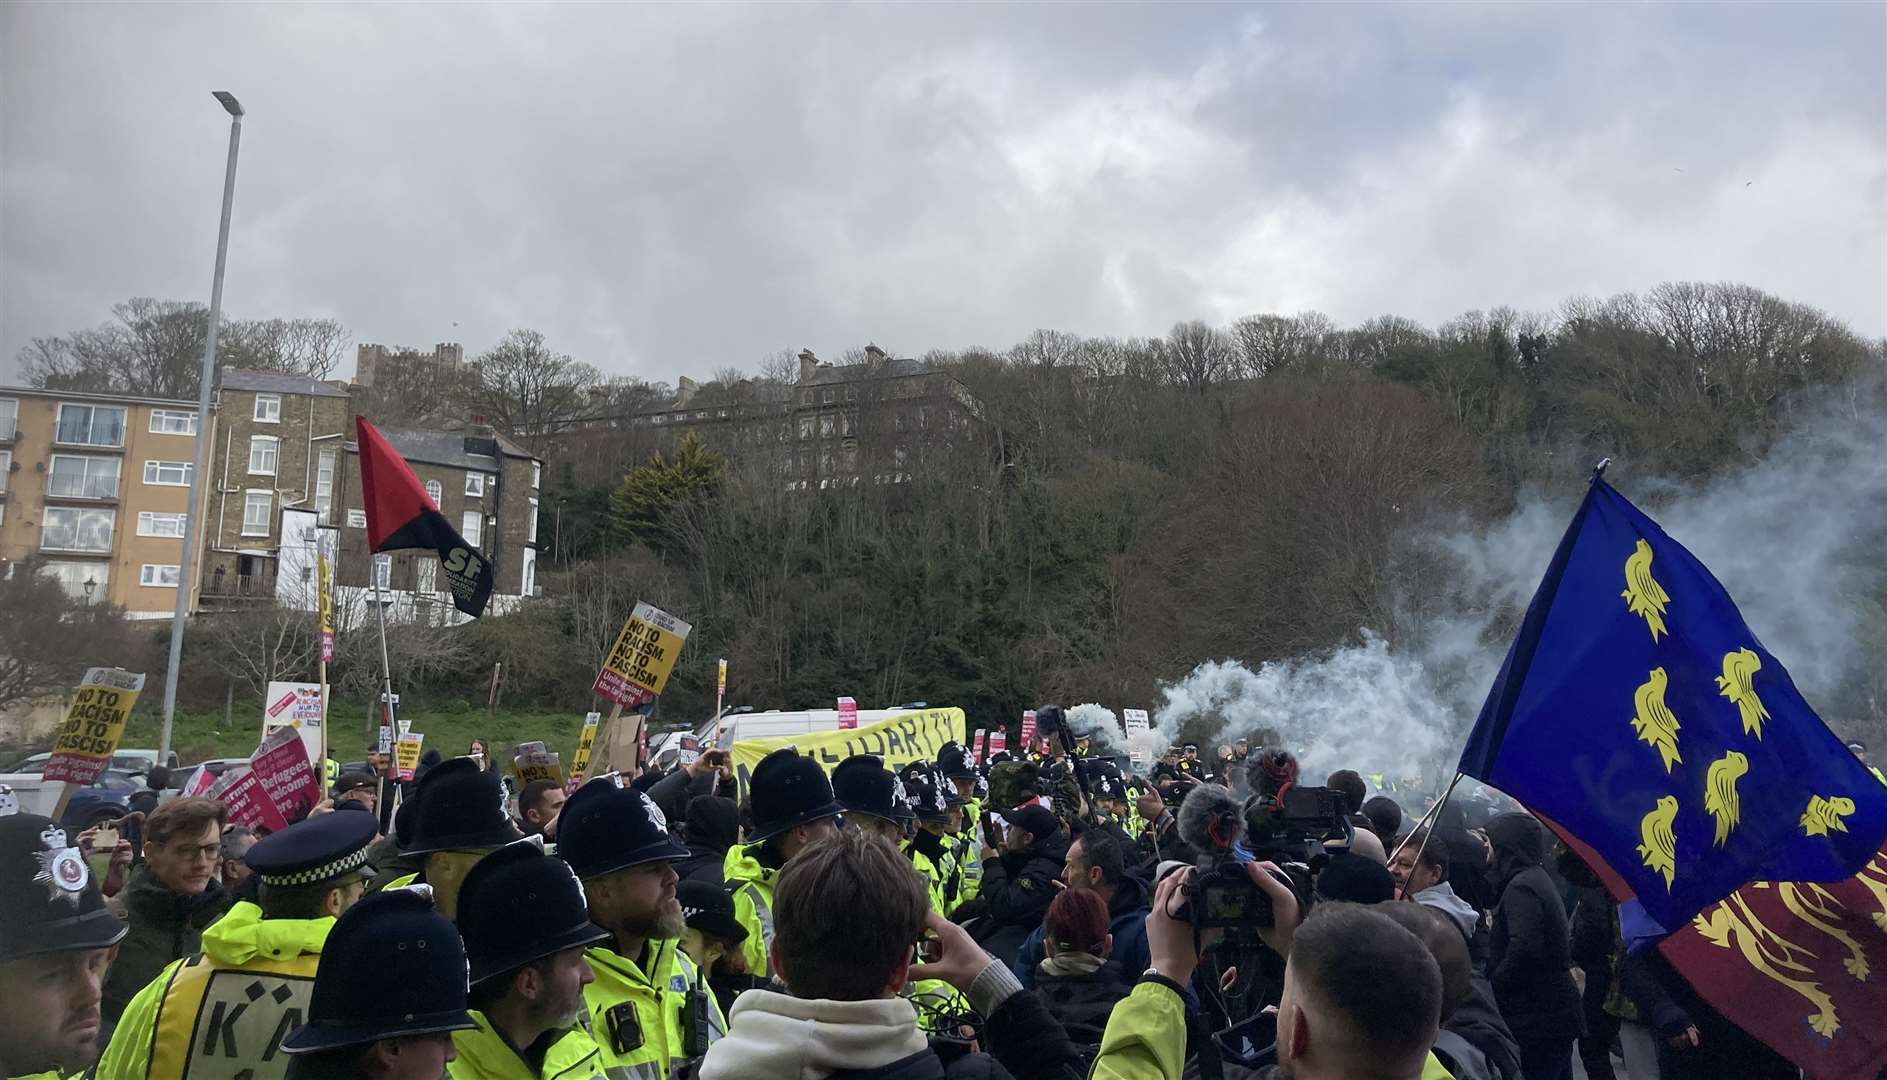 A flare was let off during the rally in Dover